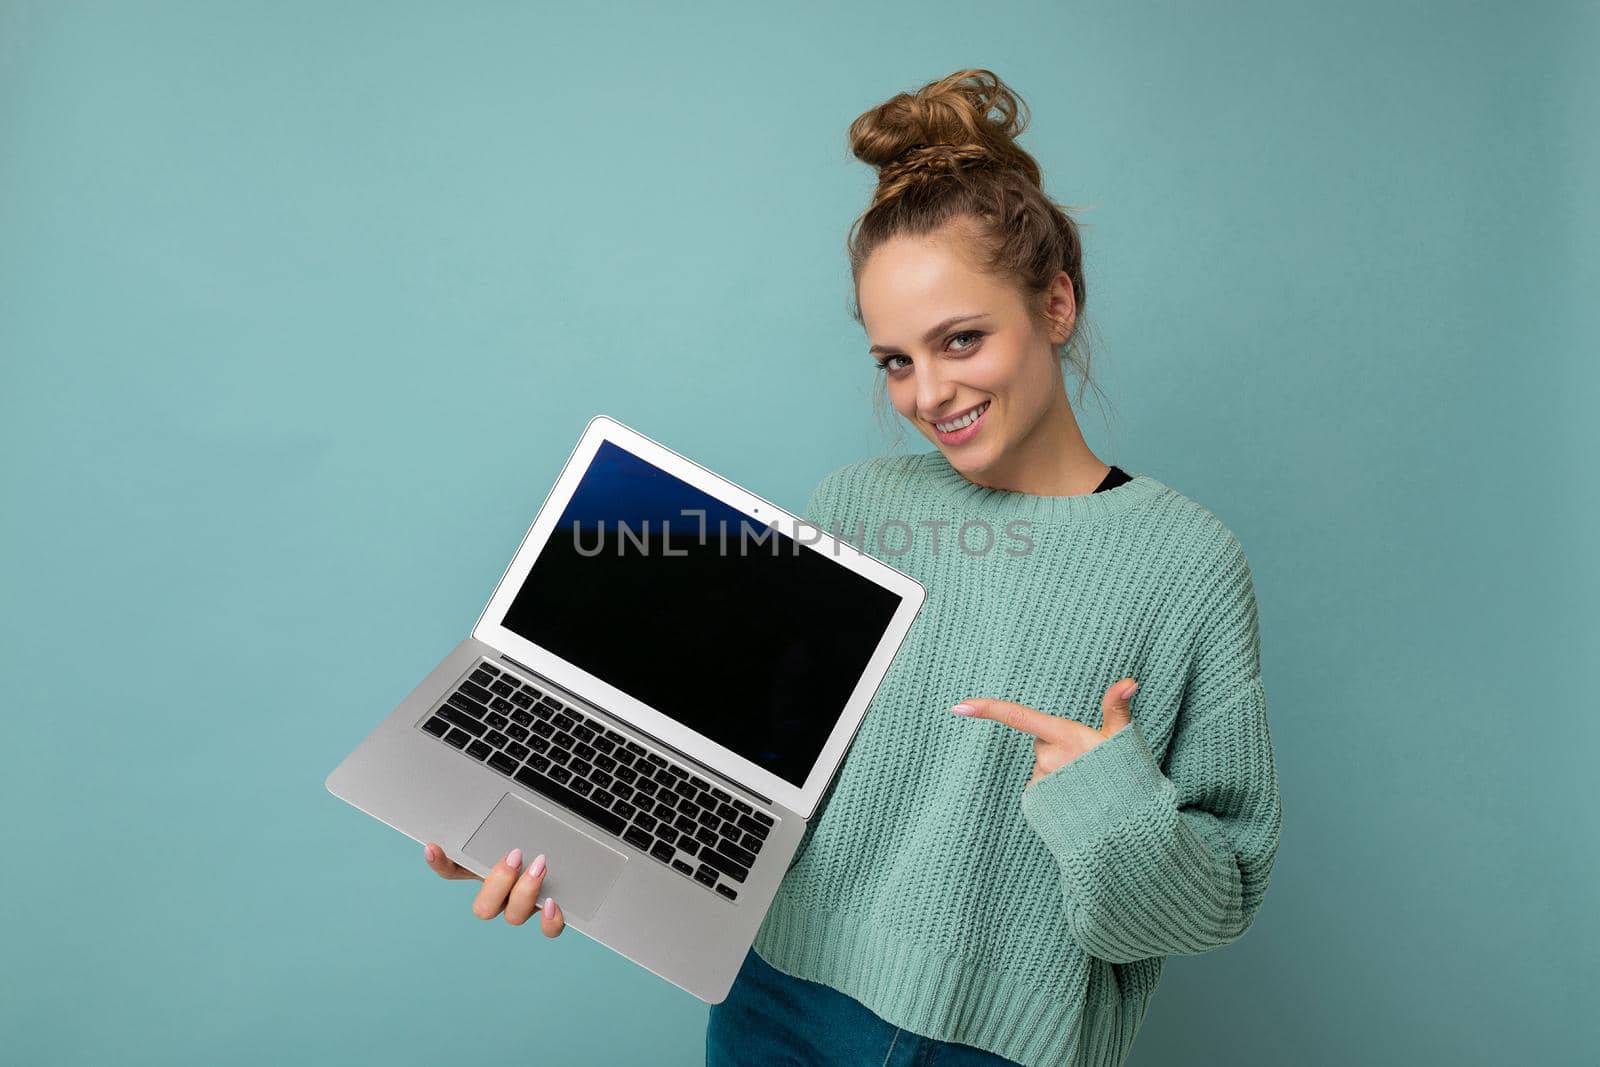 beautiful dark blond young woman with gathered curly hair looking at camera holding computer laptop with empty monitor screen with mock up and copy space wearing blue longsleeve isolated on light blue wall background.